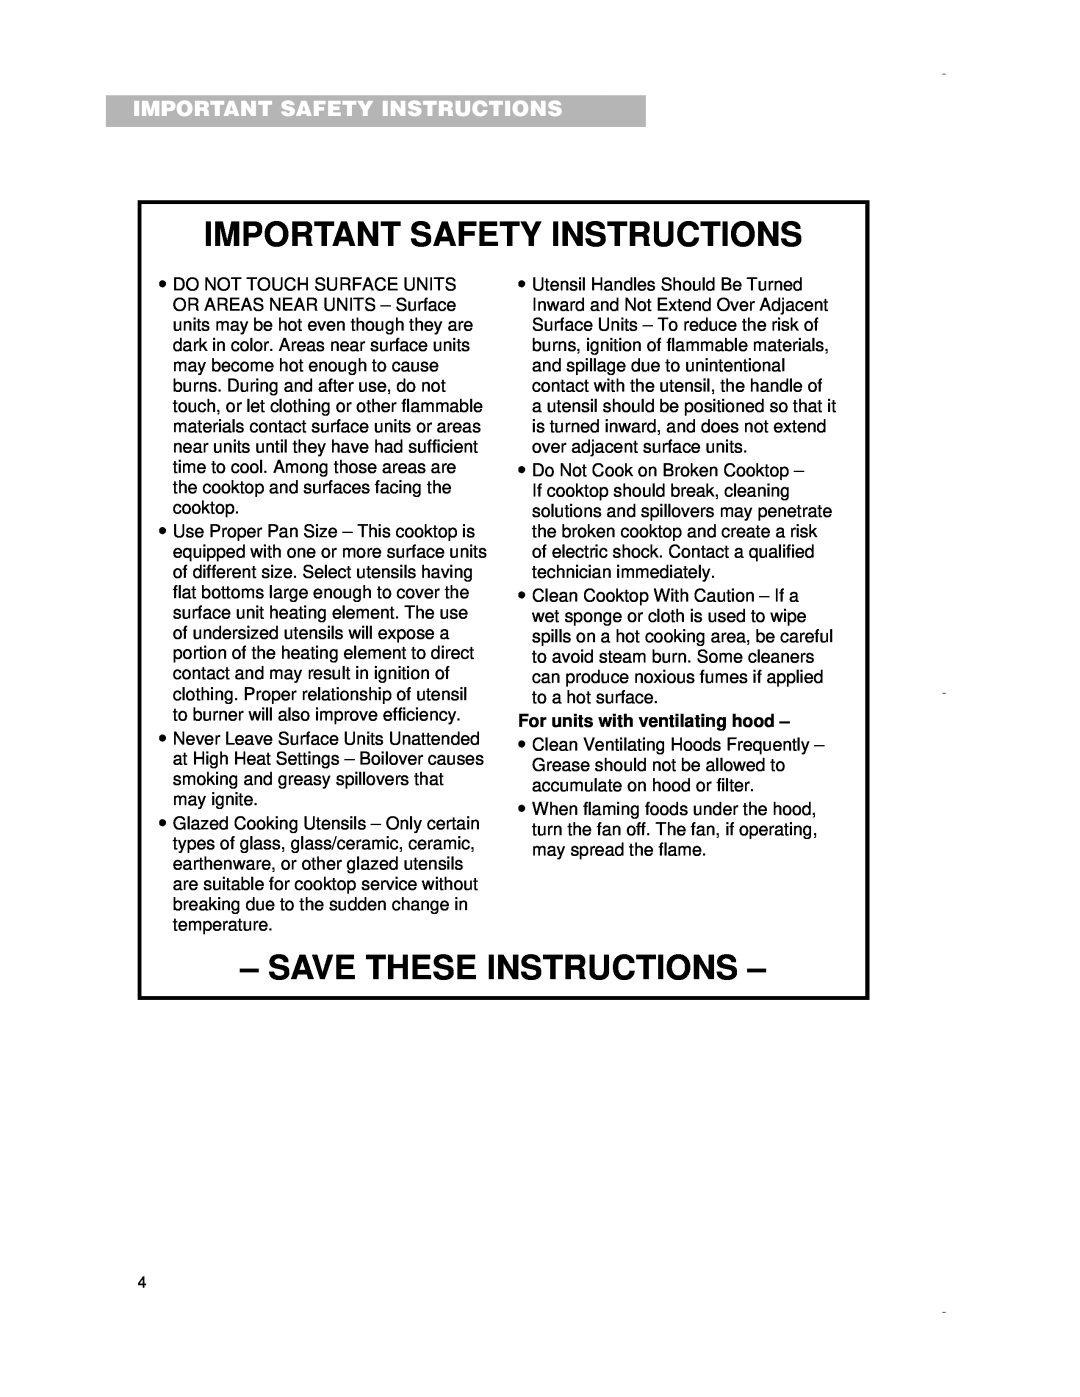 Whirlpool RCS3004G, RCS3614G Important Safety Instructions, Save These Instructions, For units with ventilating hood 